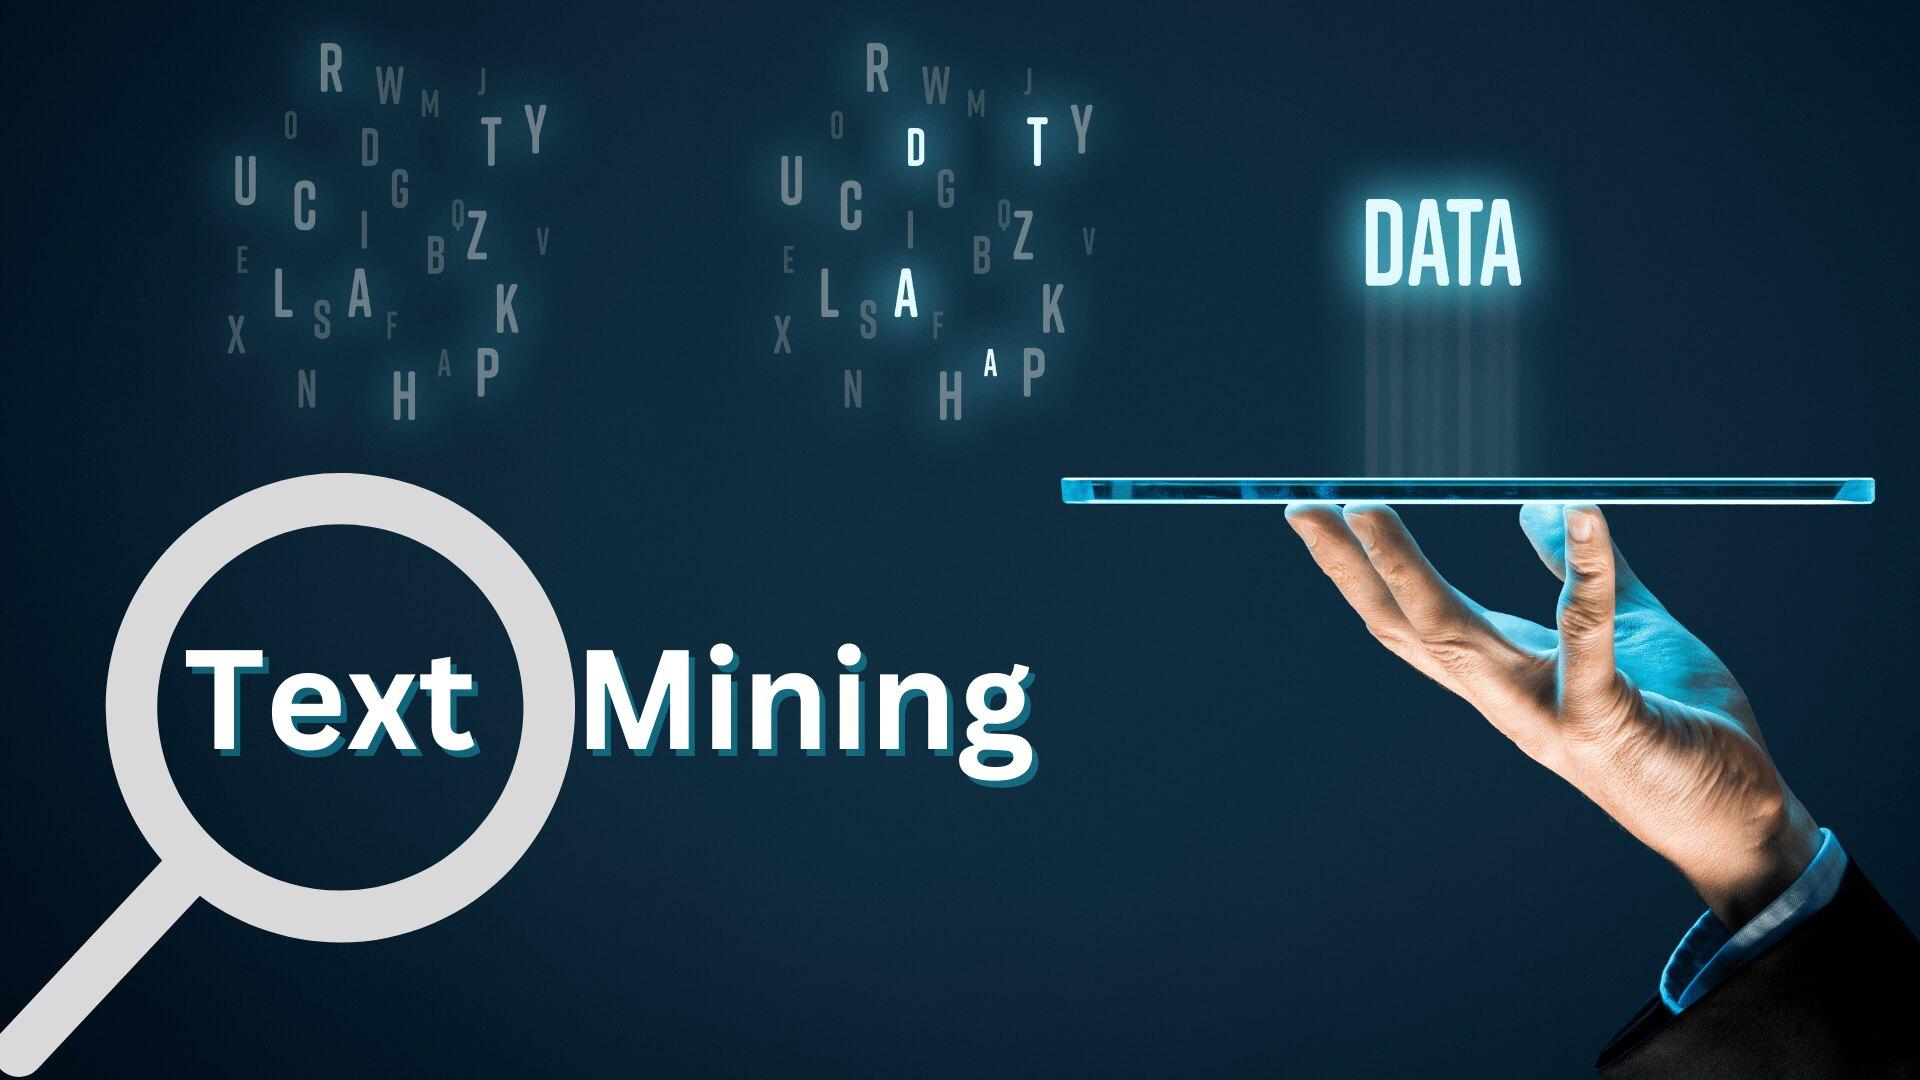 What is Text Mining?